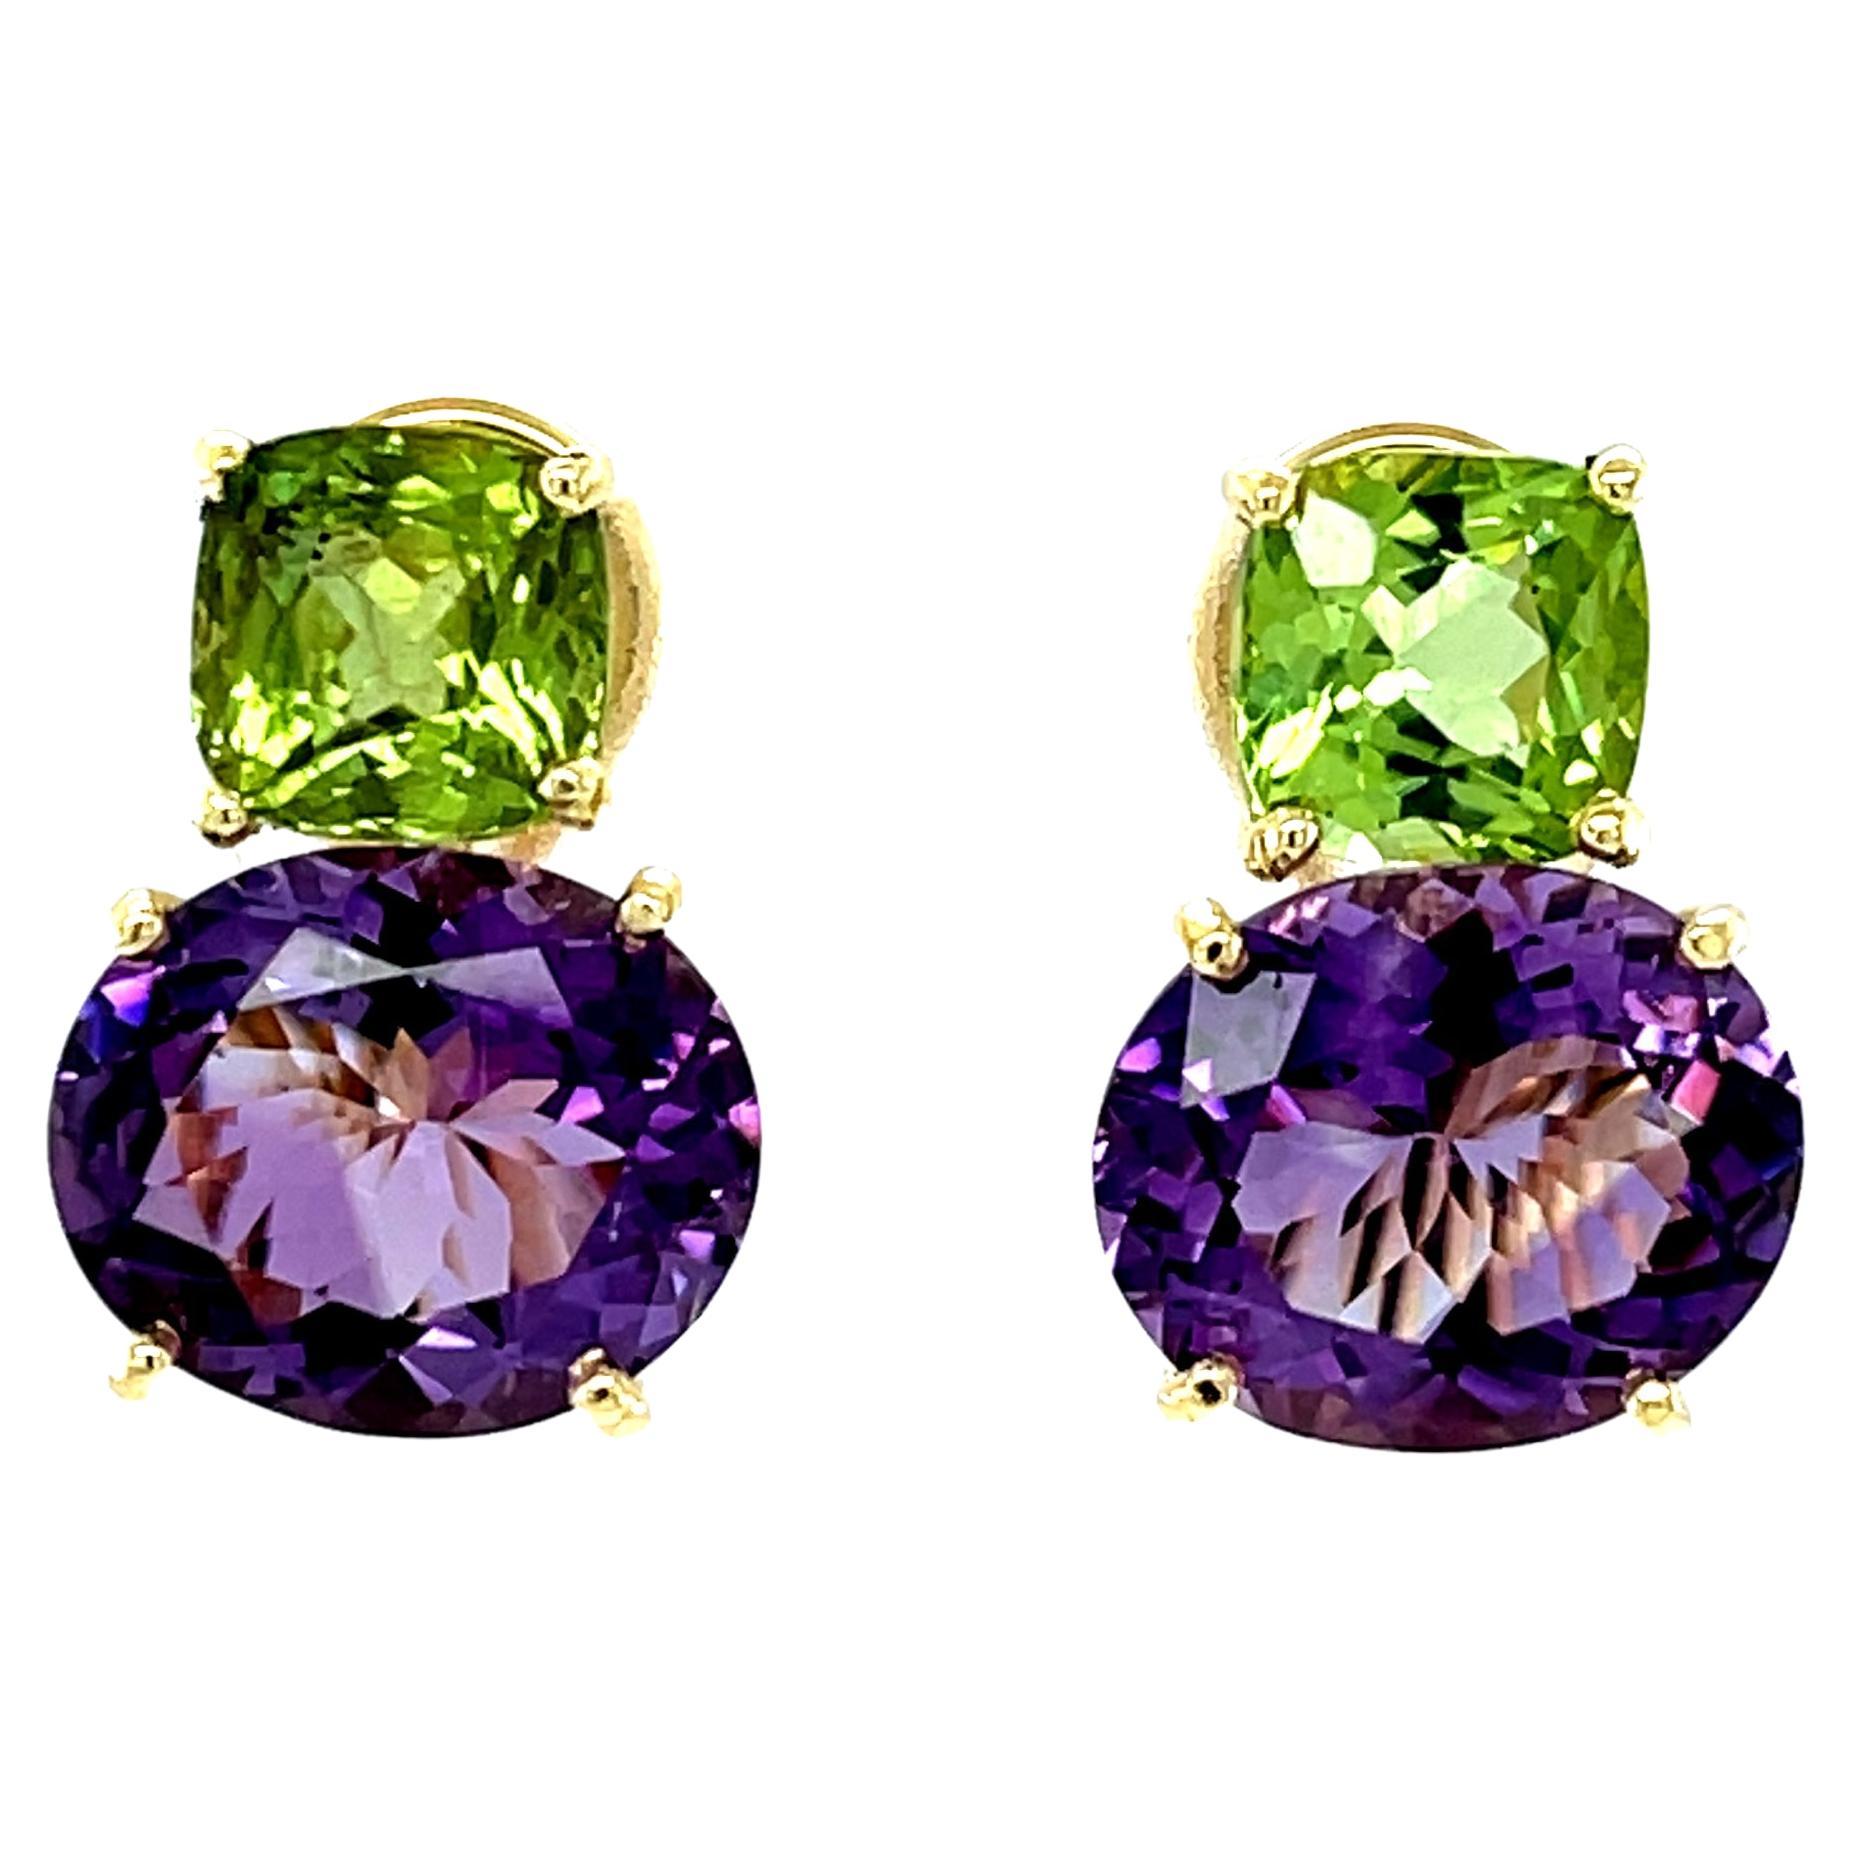 Peridot and Amethyst Earrings in 18k Yellow Gold with French Backs